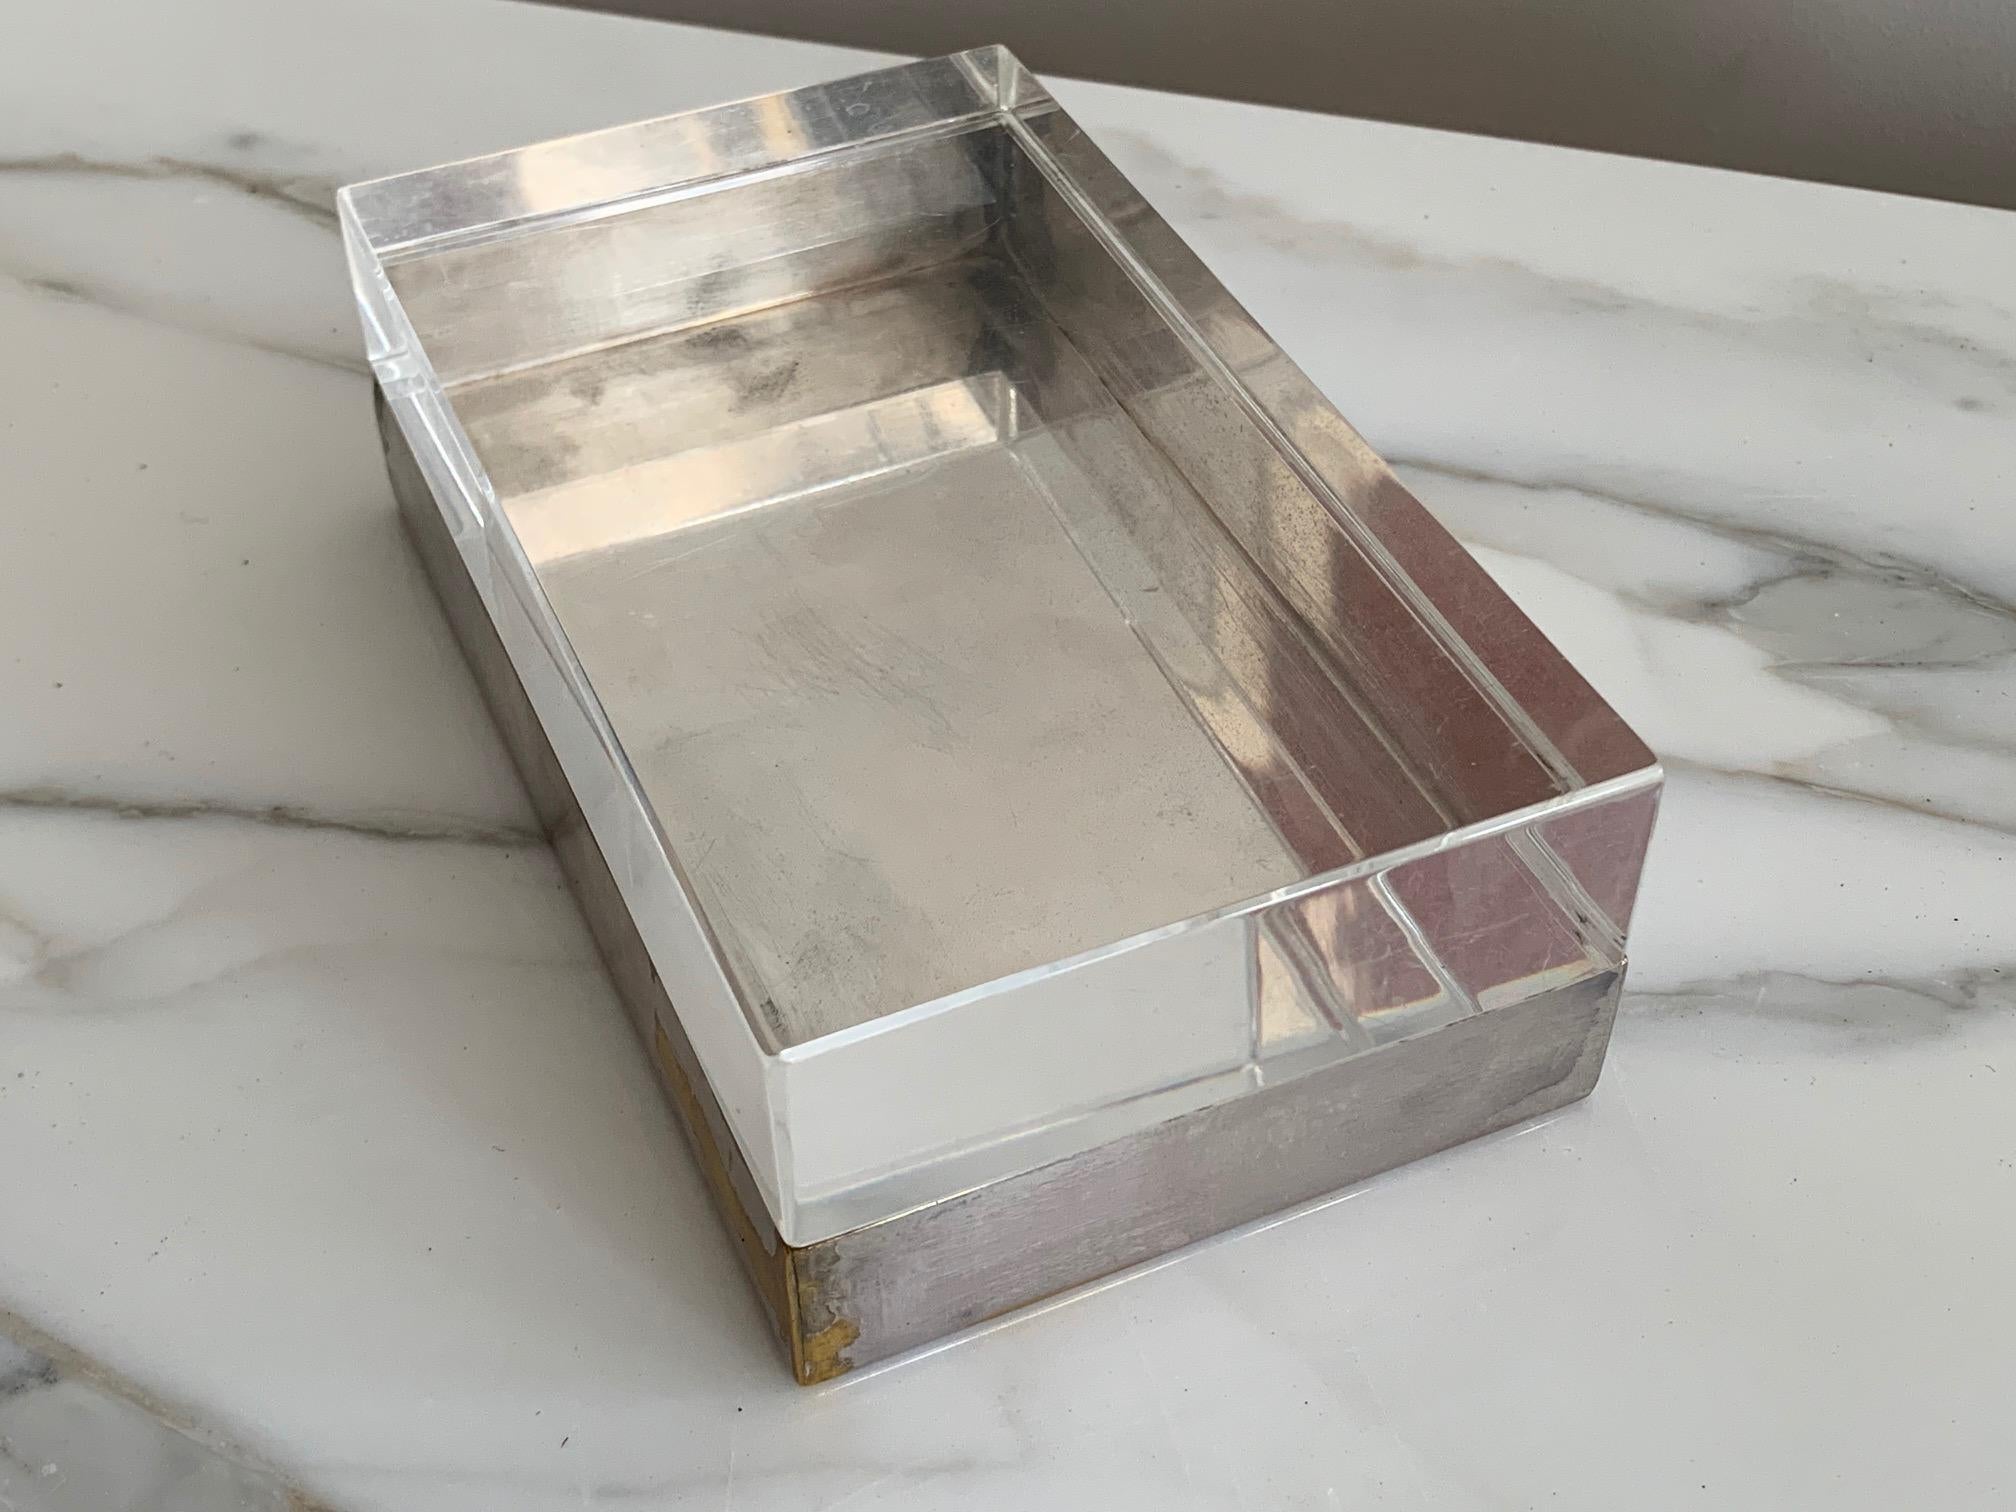 A beautiful and classic decorative box by Christofle, circa 1970s. Lucite and silverplated brass.